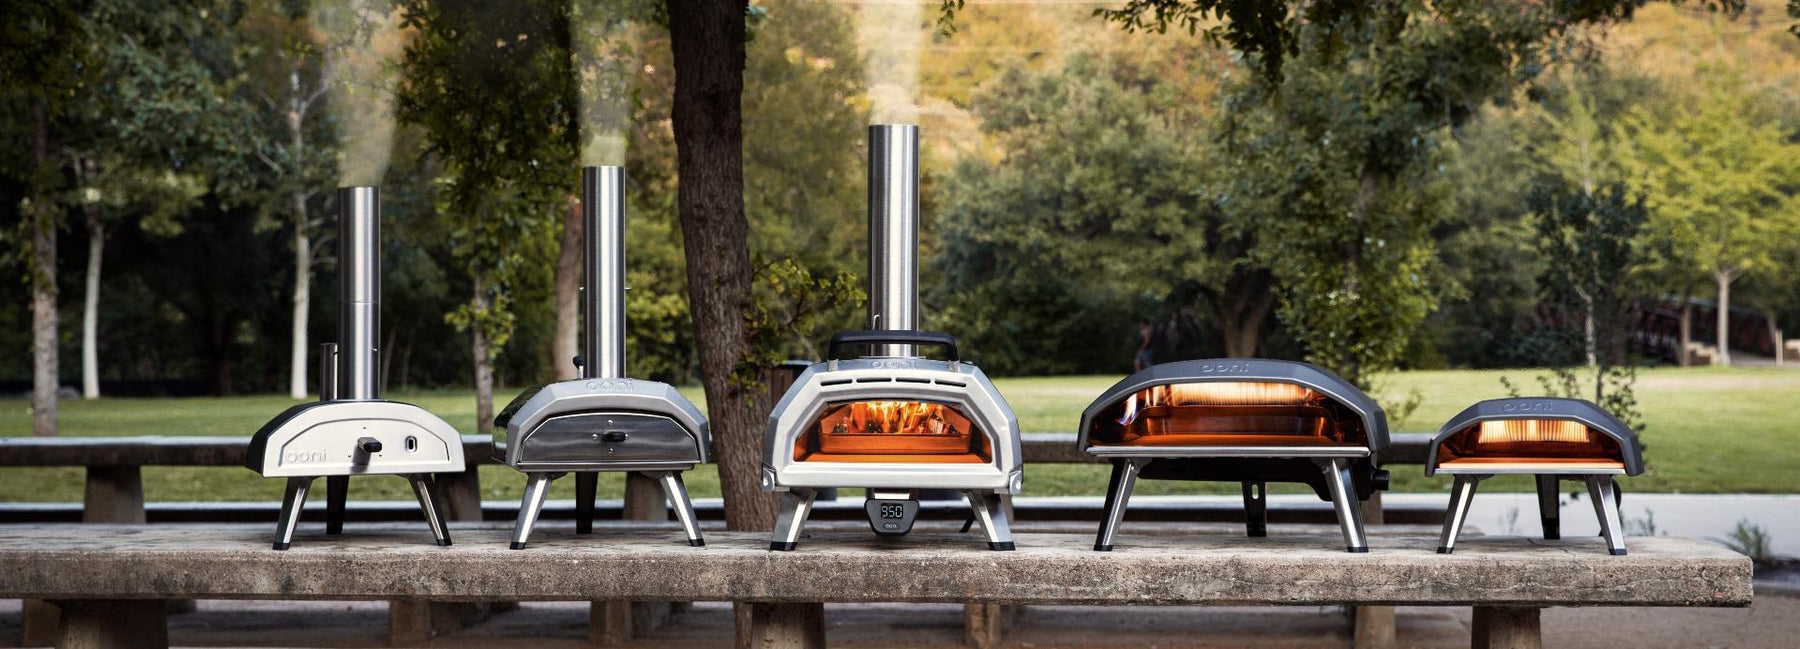 Collection of Ooni Pizza ovens on top of a wooden bench